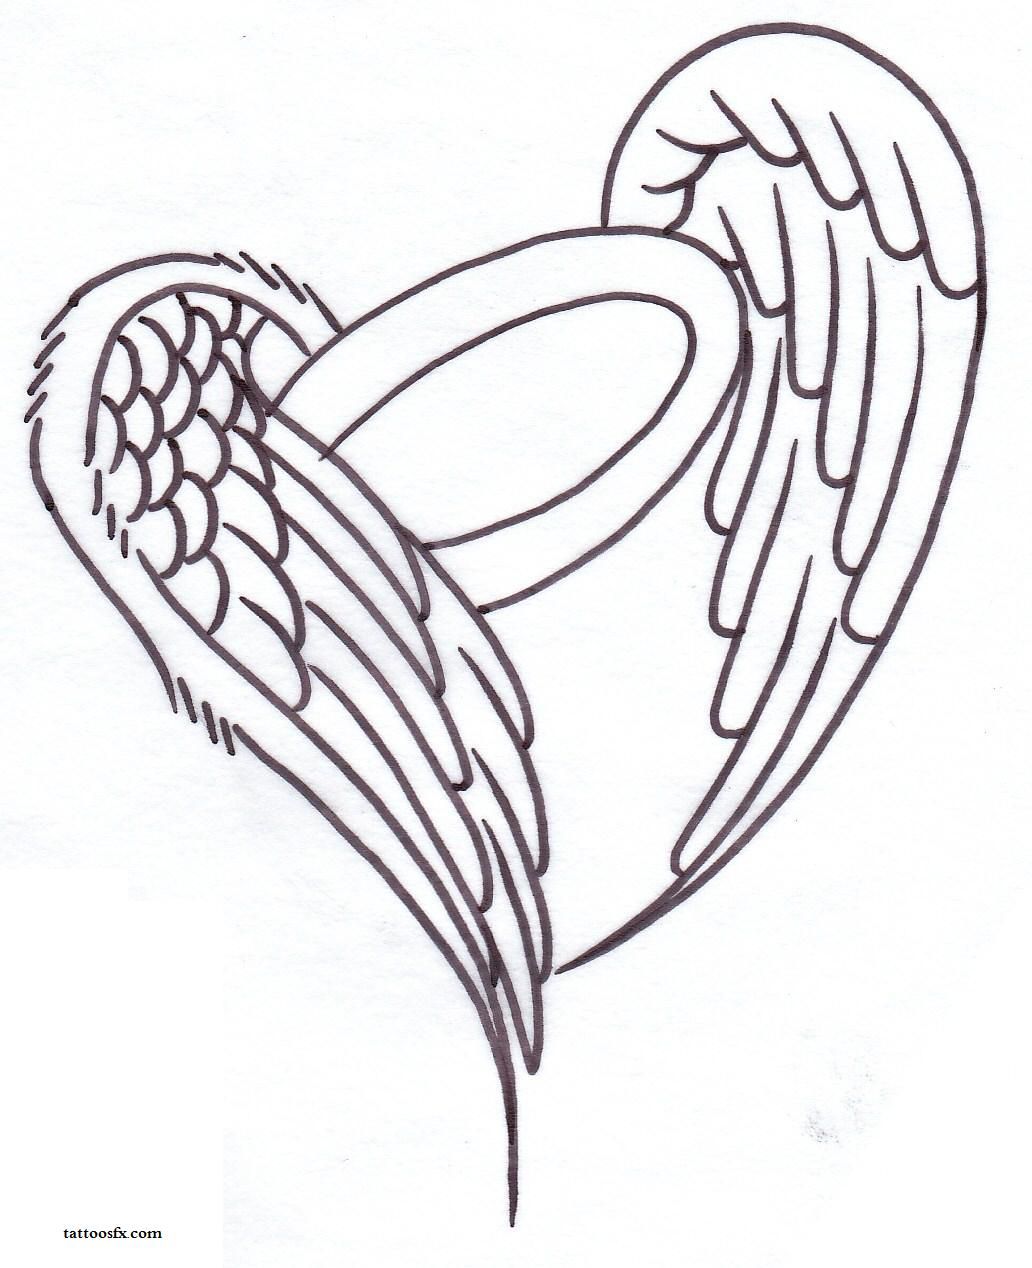 Coloring Pages Of Hearts With Wings - Coloring Pages & Pictures ...